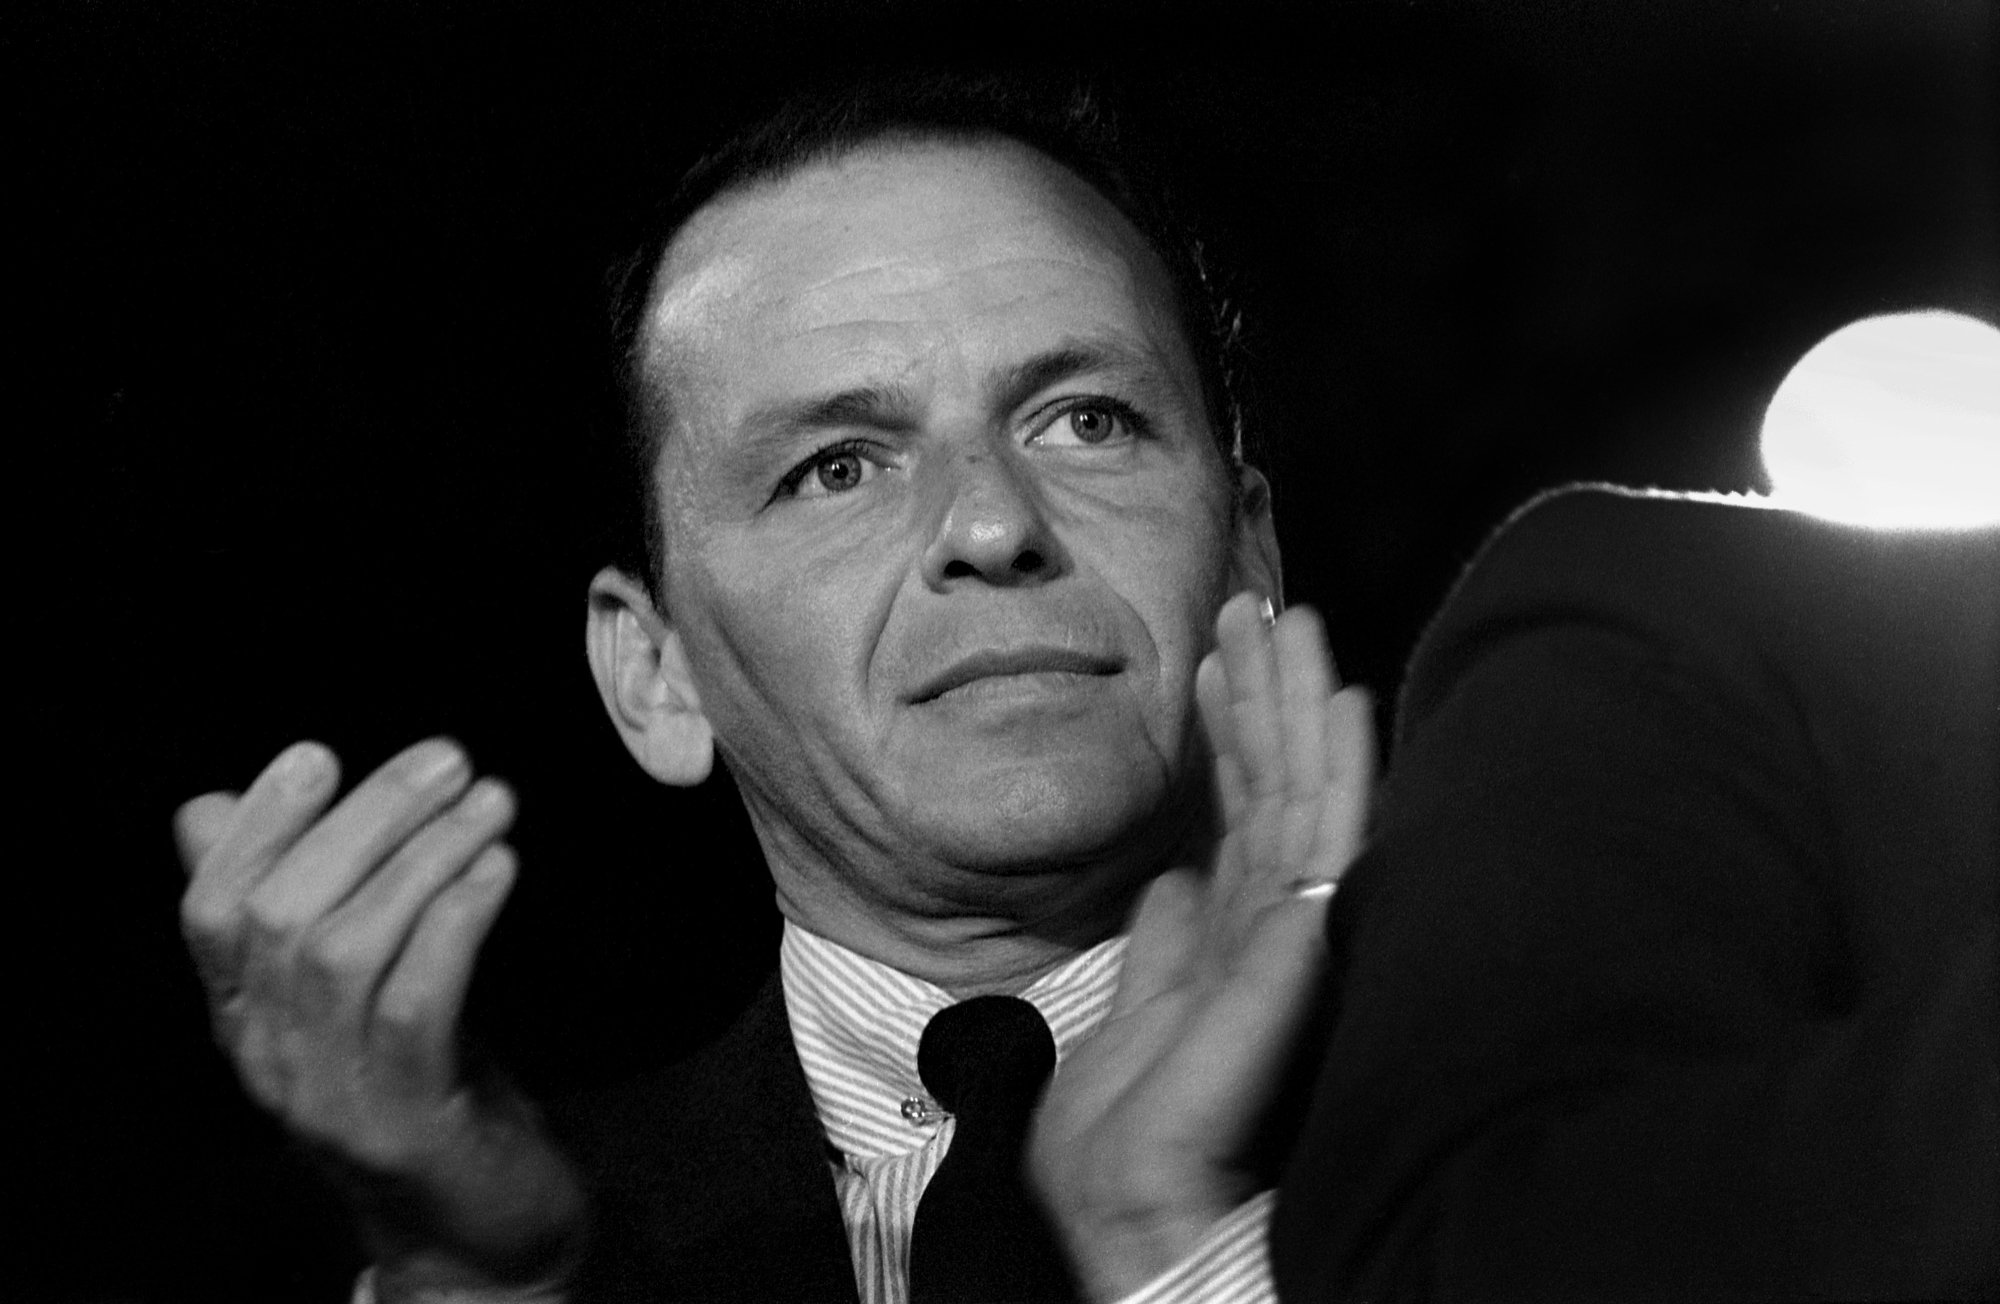 'Die Hard' Frank Sinatra in an article about him being offered John McClane role clapping